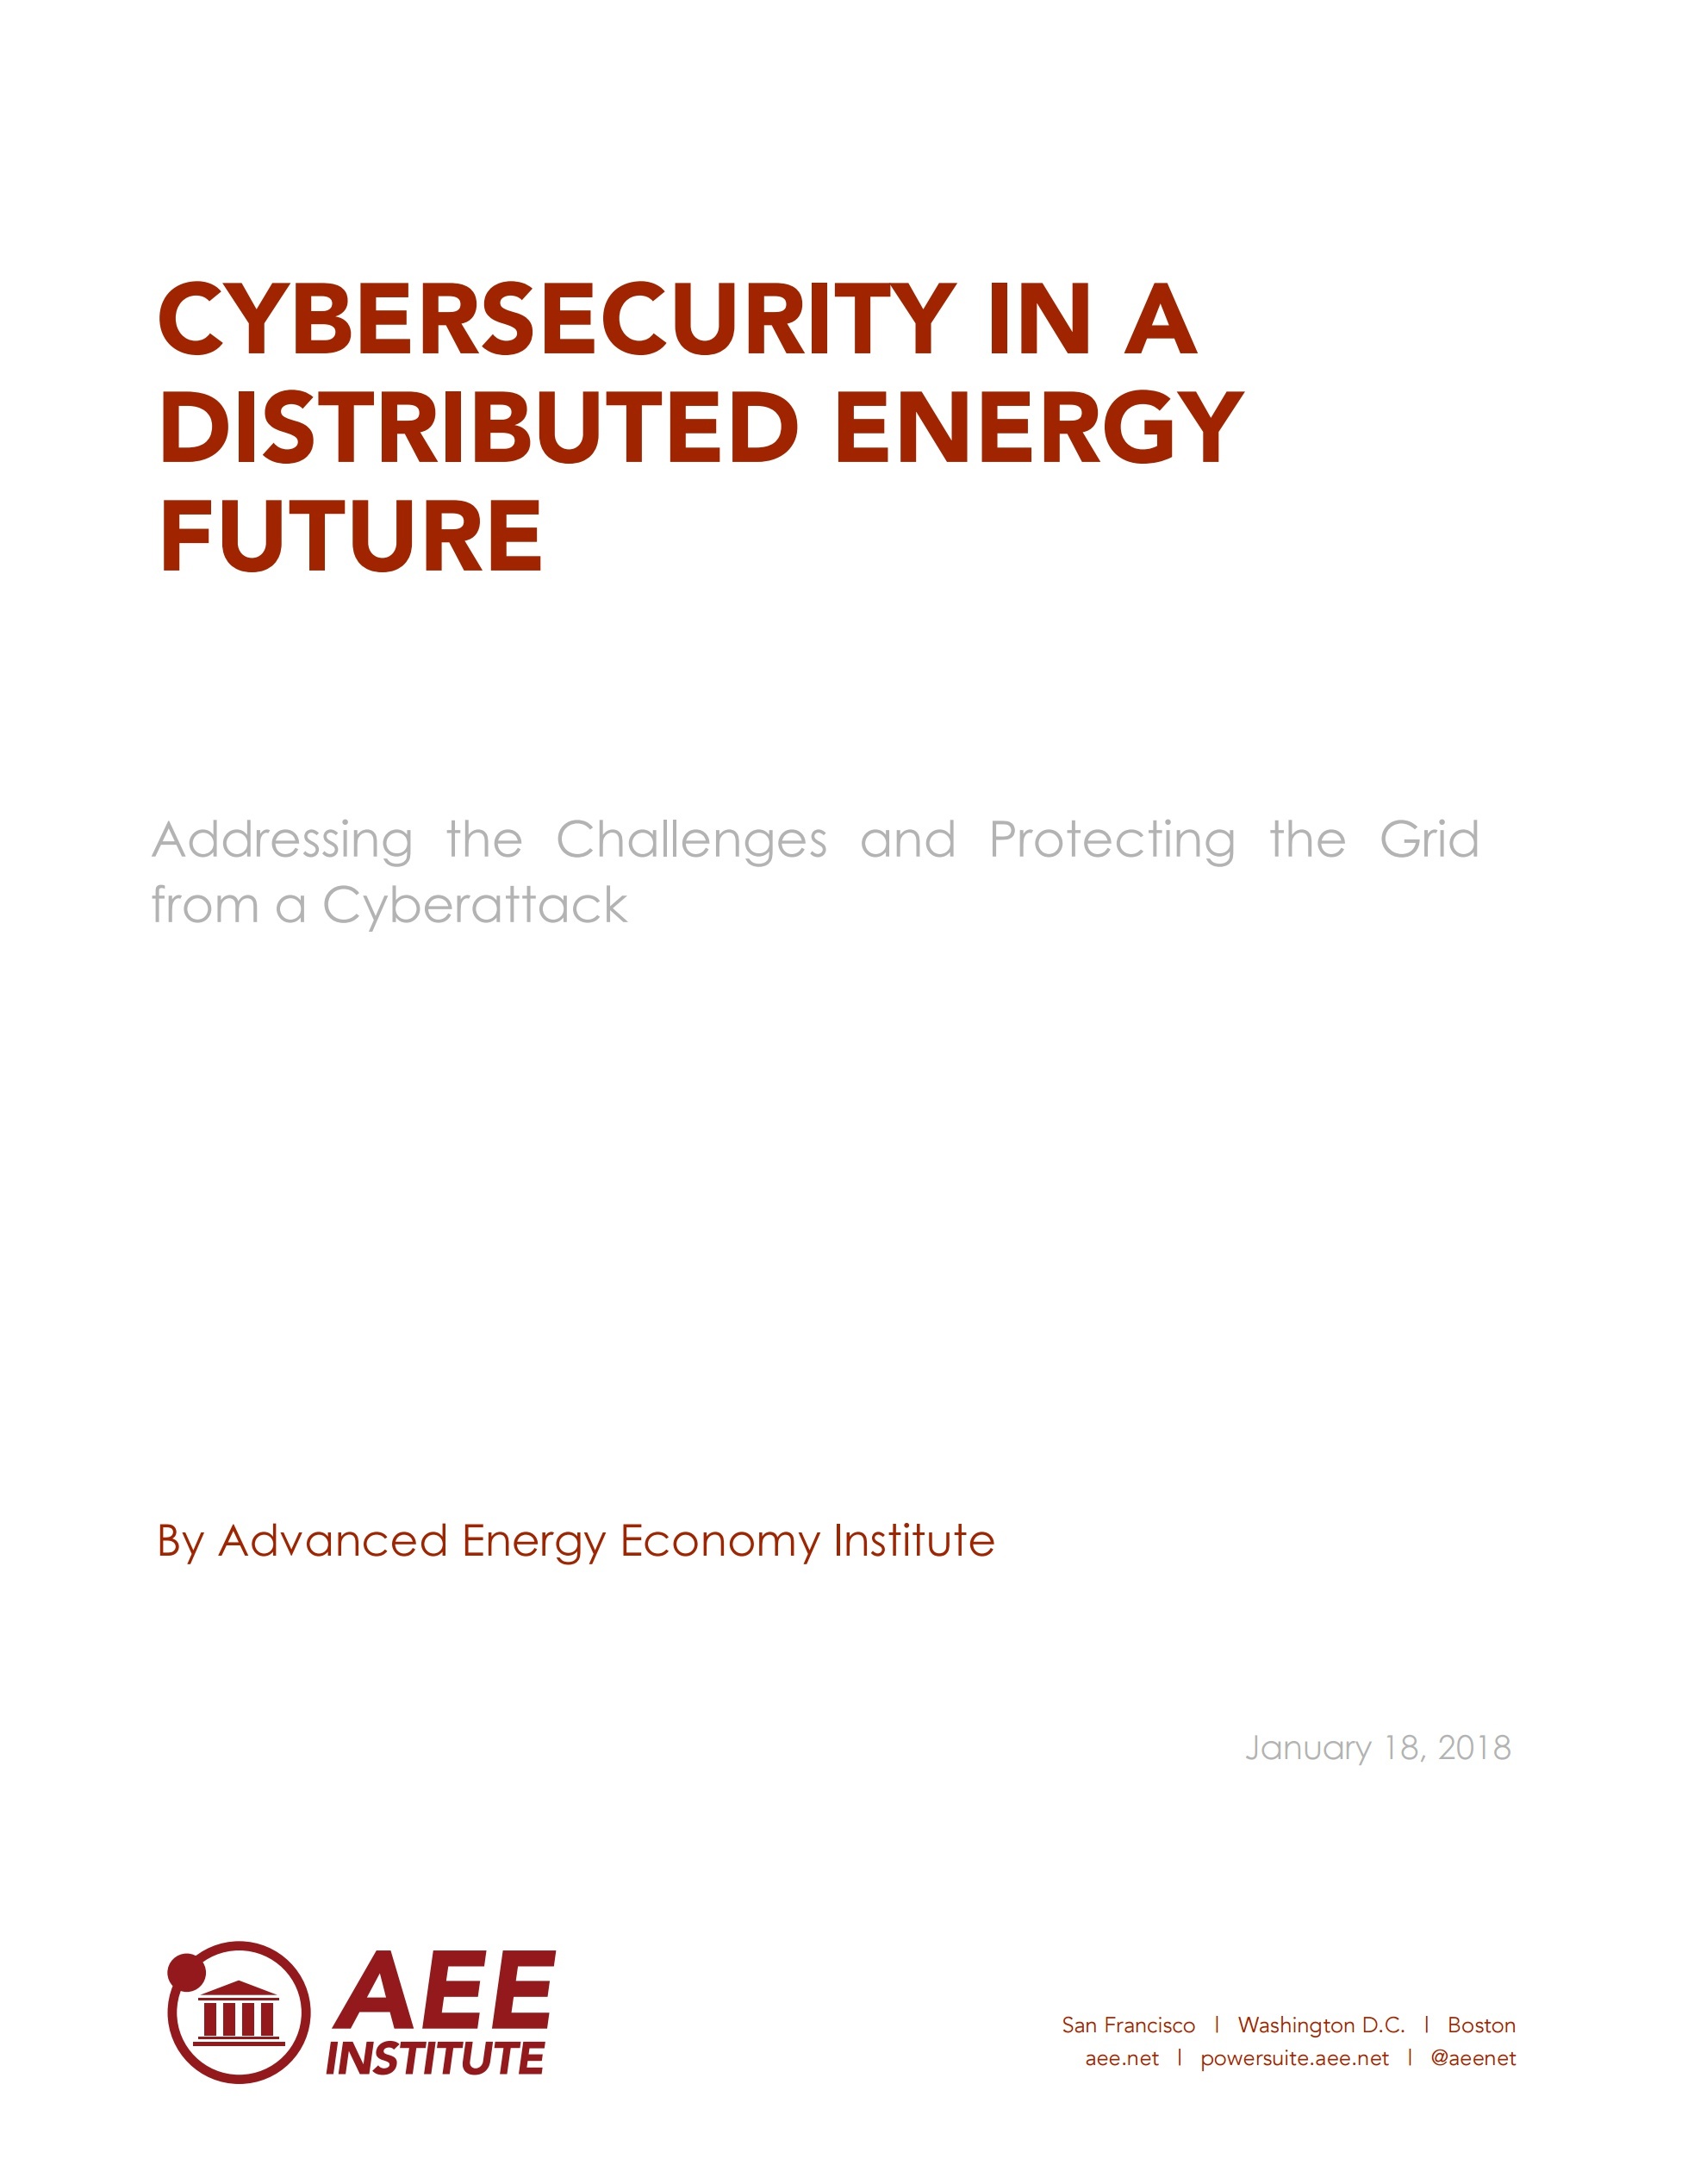 Cover_Cybersecurity_1.18.18.jpg